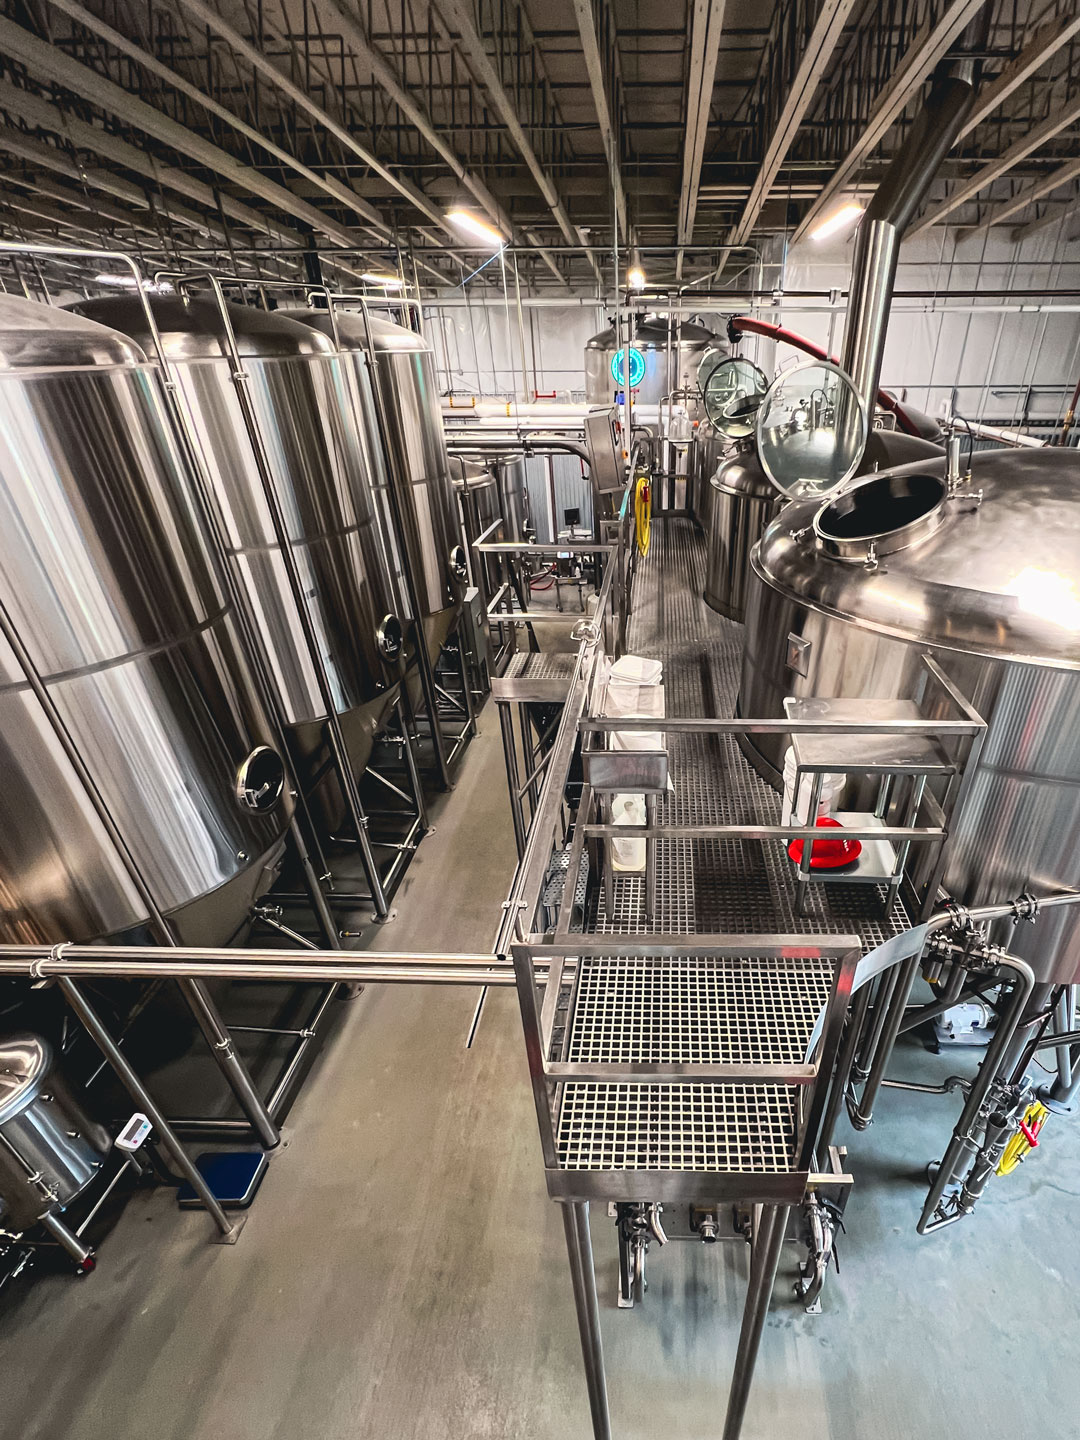 Birds-eye-view of the brewing tanks